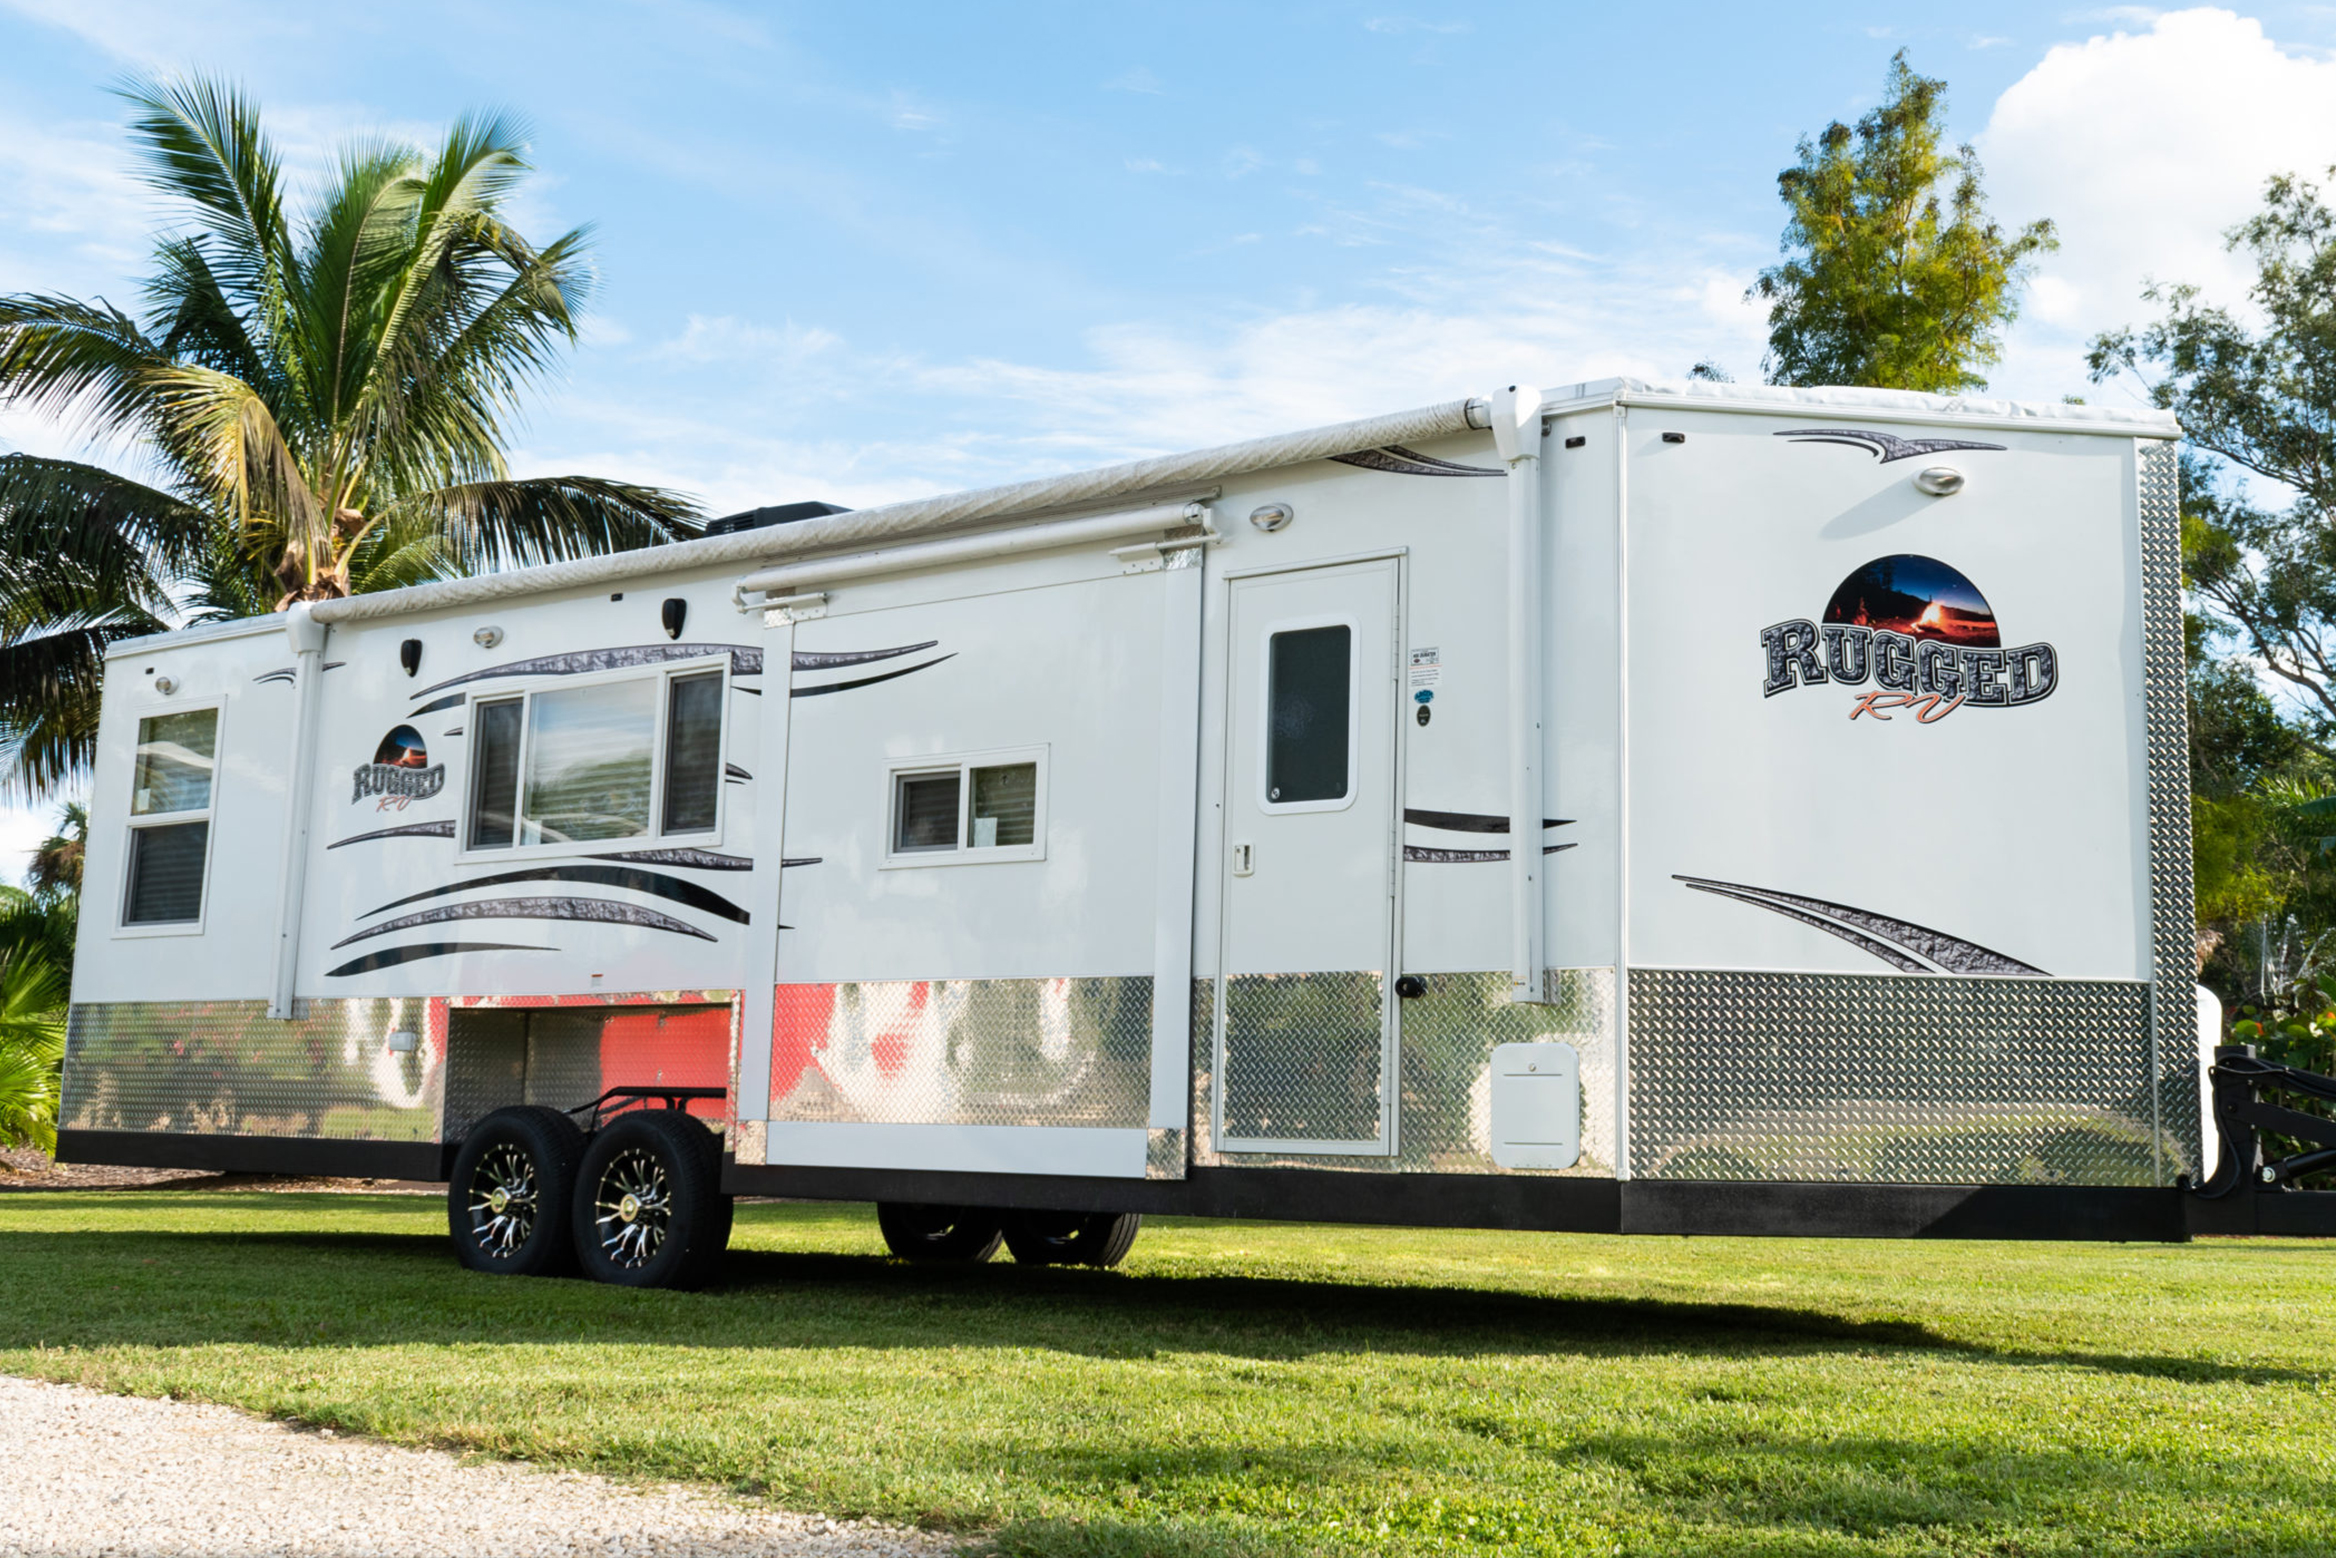 View RVs Pictures & Videos from 8x26 to 8x32